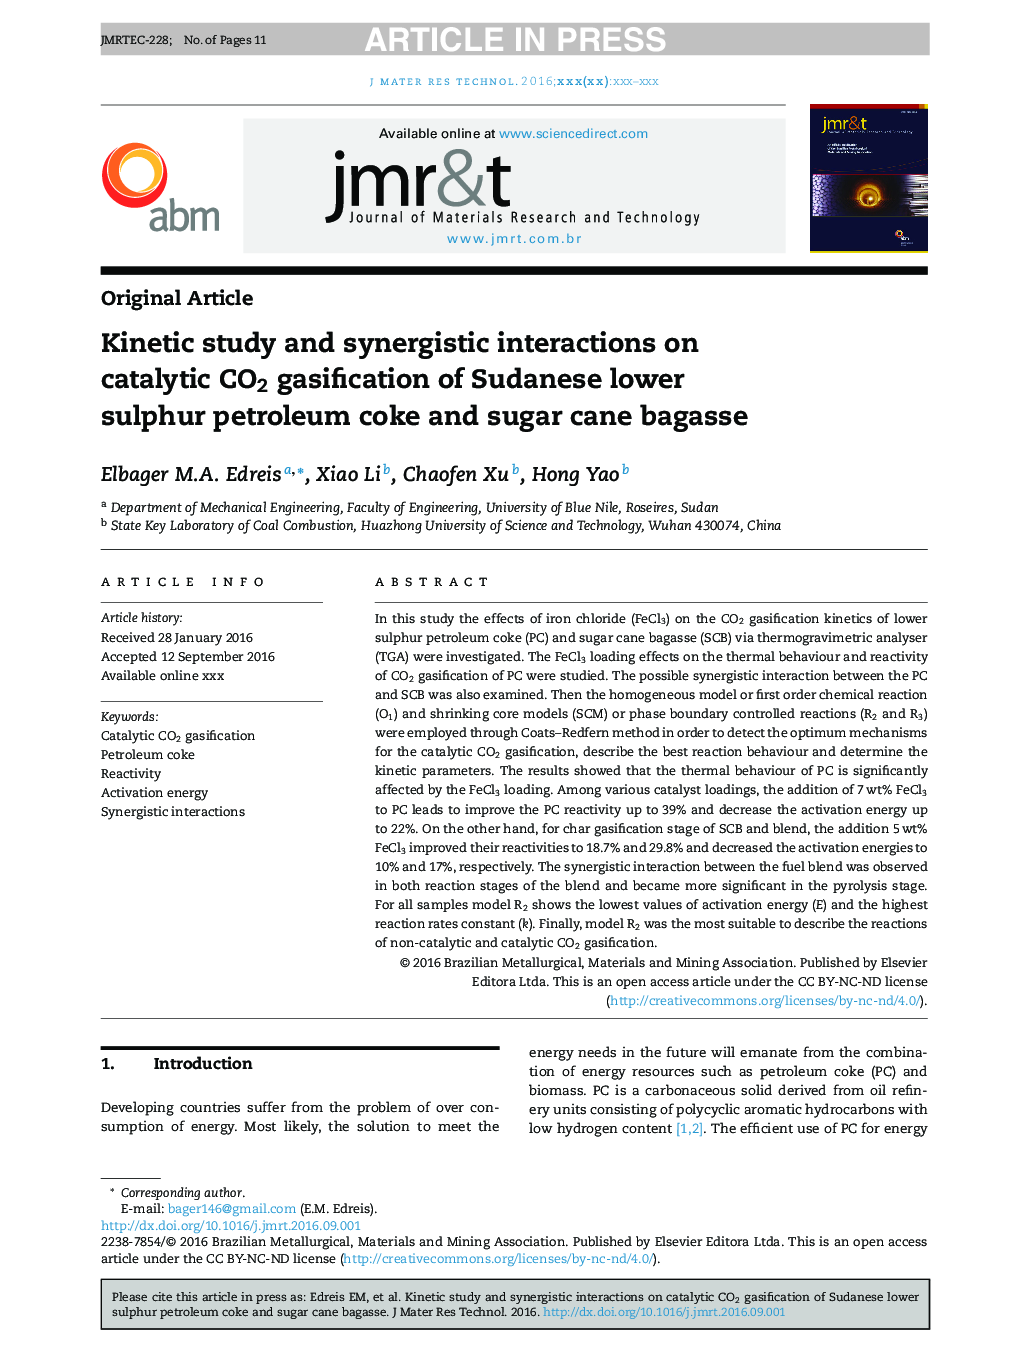 Kinetic study and synergistic interactions on catalytic CO2 gasification of Sudanese lower sulphur petroleum coke and sugar cane bagasse